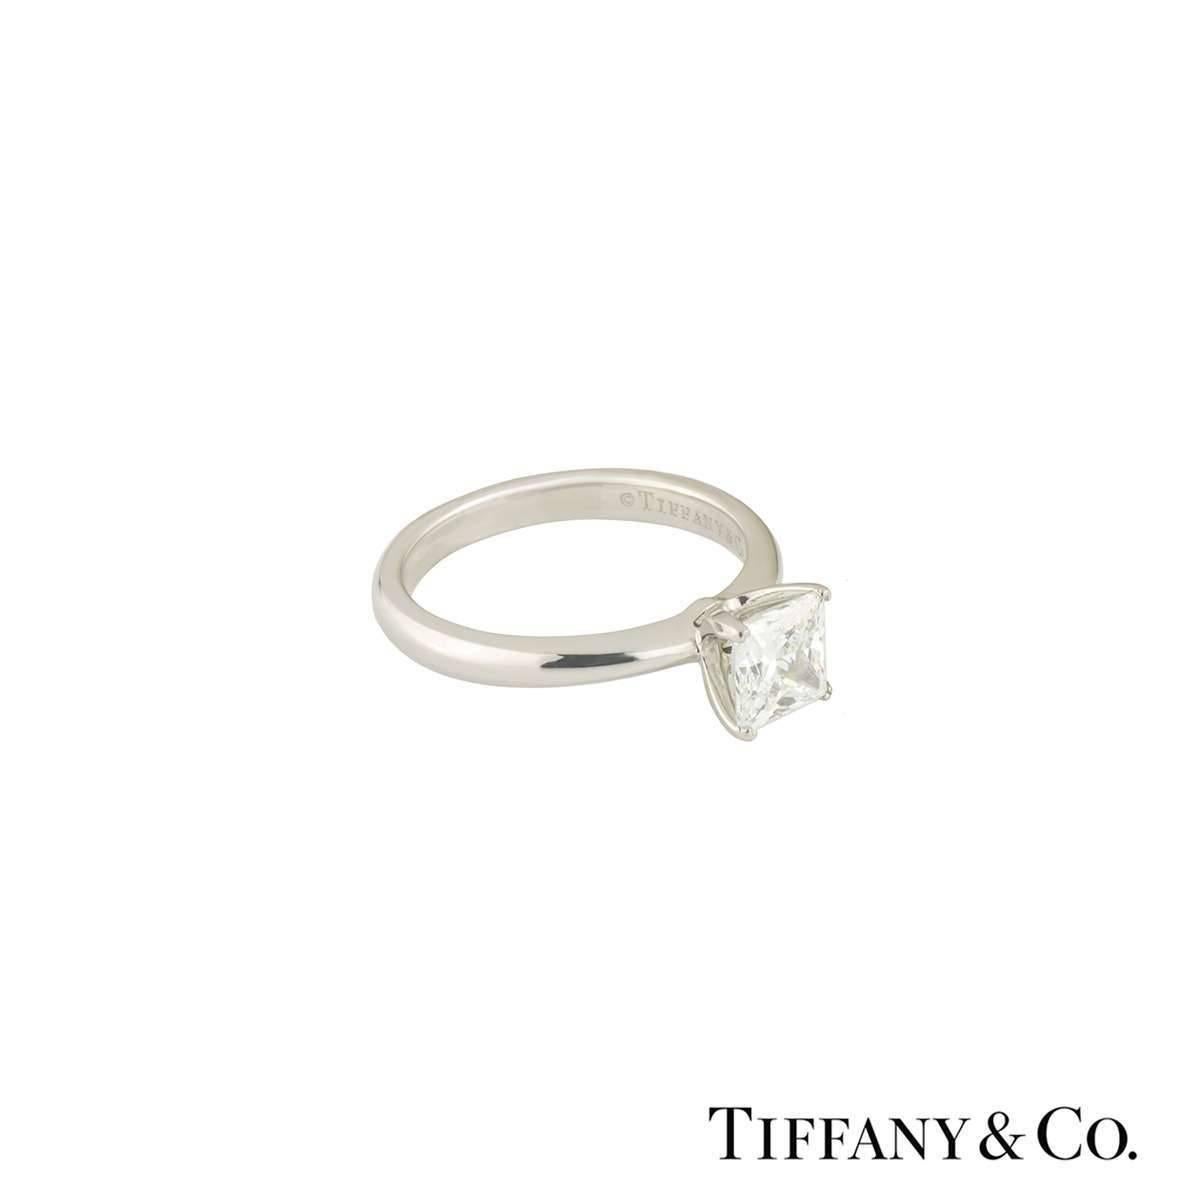 A beautiful platinum diamond Tiffany & Co. ring from the princess cut collection. The ring comprises of a princess cut diamond in a 4 claw setting with a total weight of 1.55ct, F colour and VS2 clarity. The ring is set in a court fit band and is a